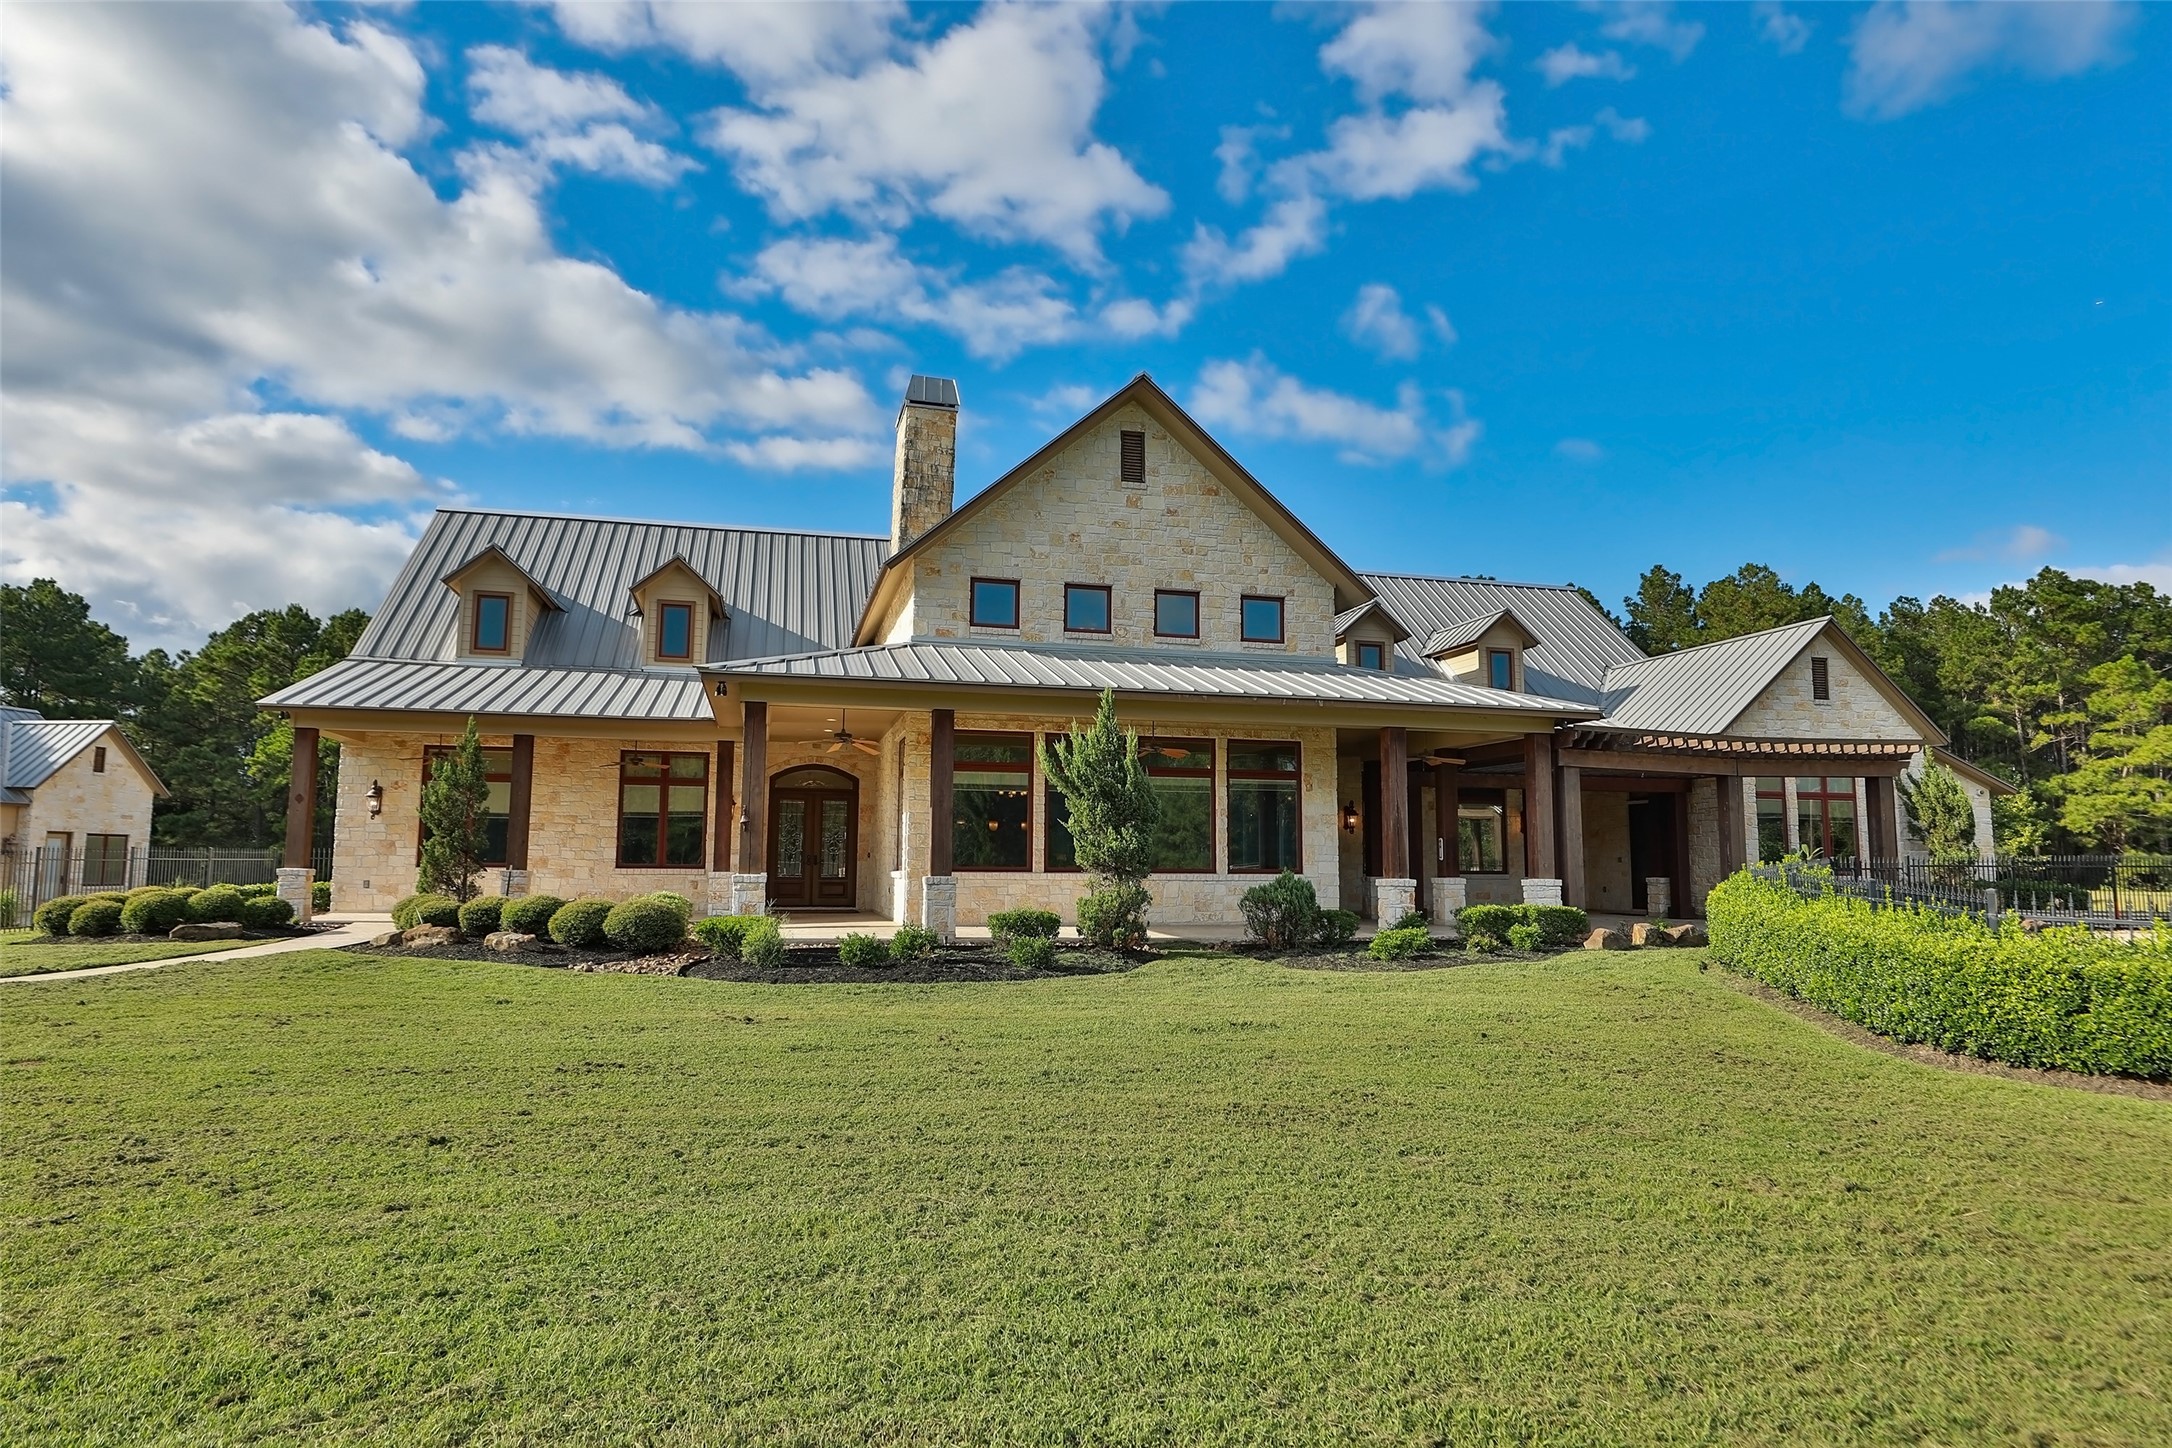 This gorgeous house is complete with tons of covered porches.